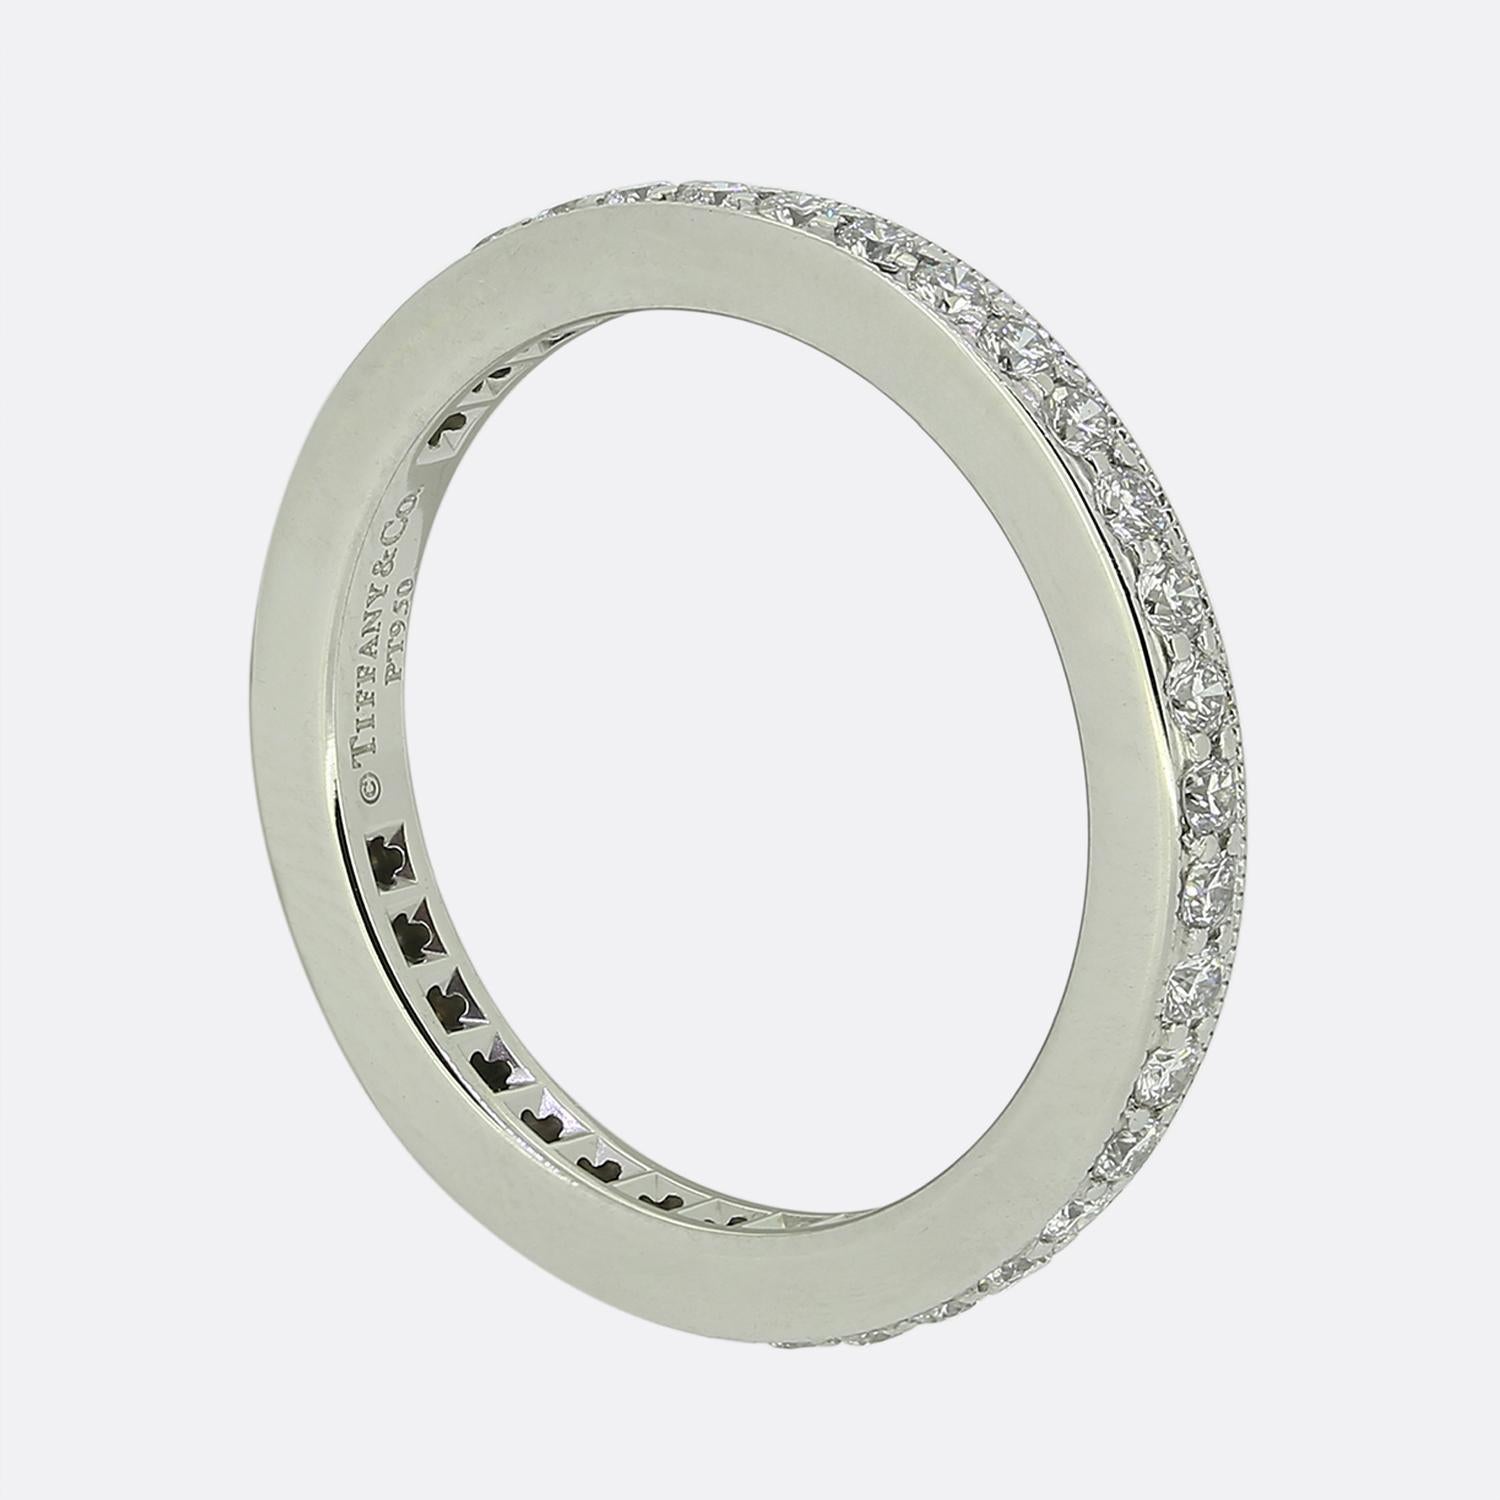 This is a platinum Tiffany & Co. diamond full eternity ring. The ring features 0.36 carats of round brilliant cut diamonds which spread the whole way around the band. The edges of the ring feature small milgrain detail with the piece forming part of